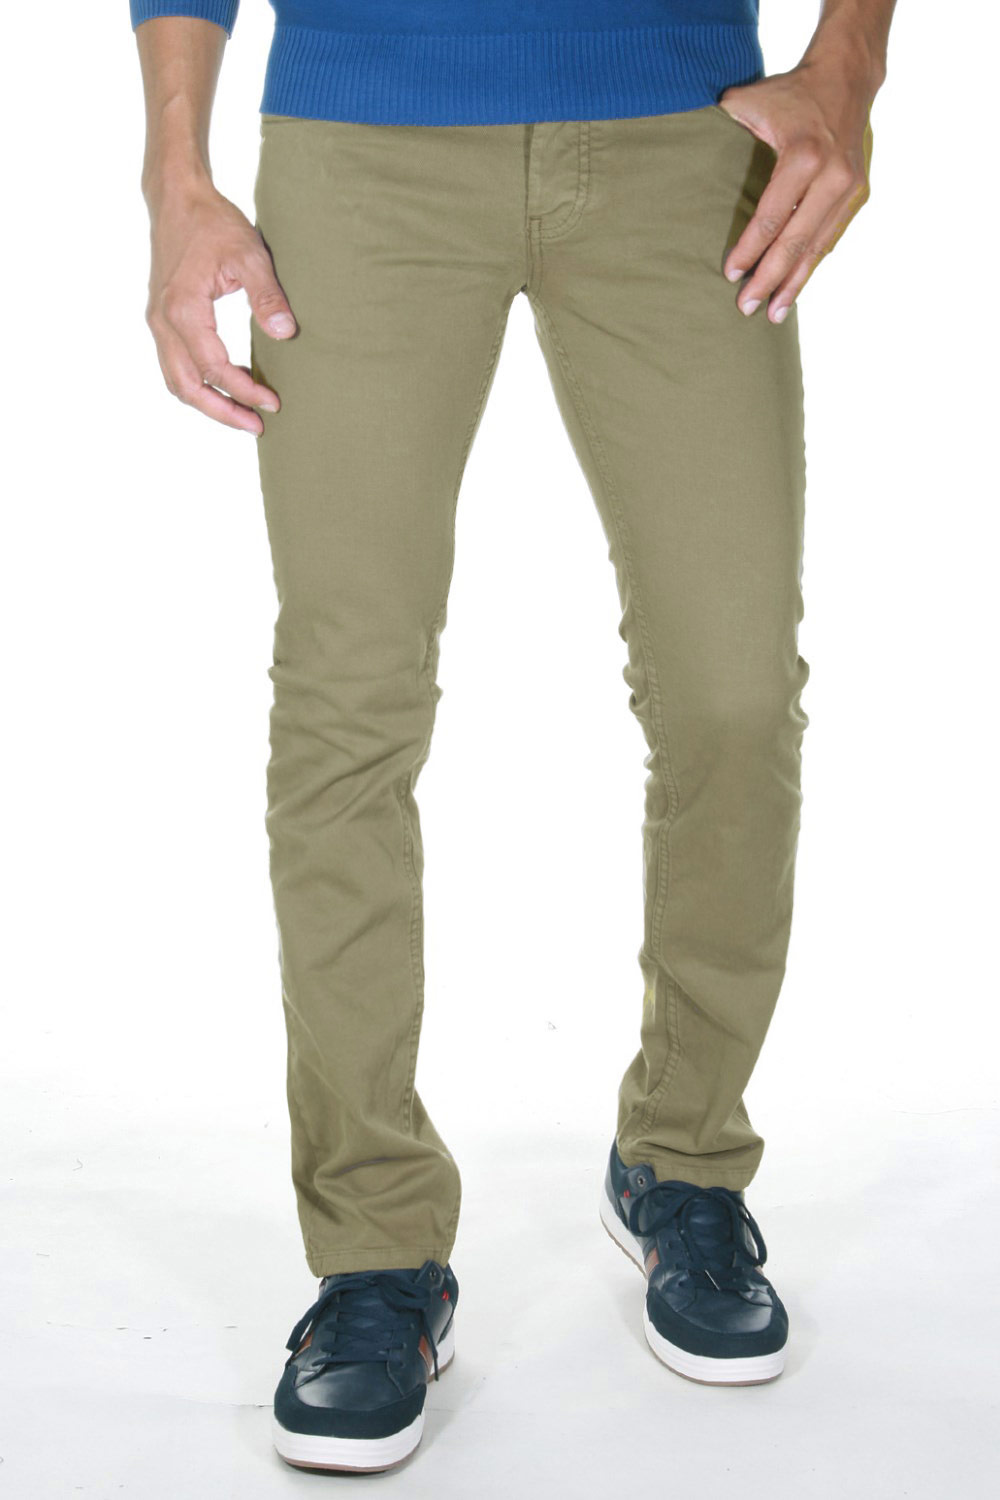 FIOCEO trousers at oboy.com